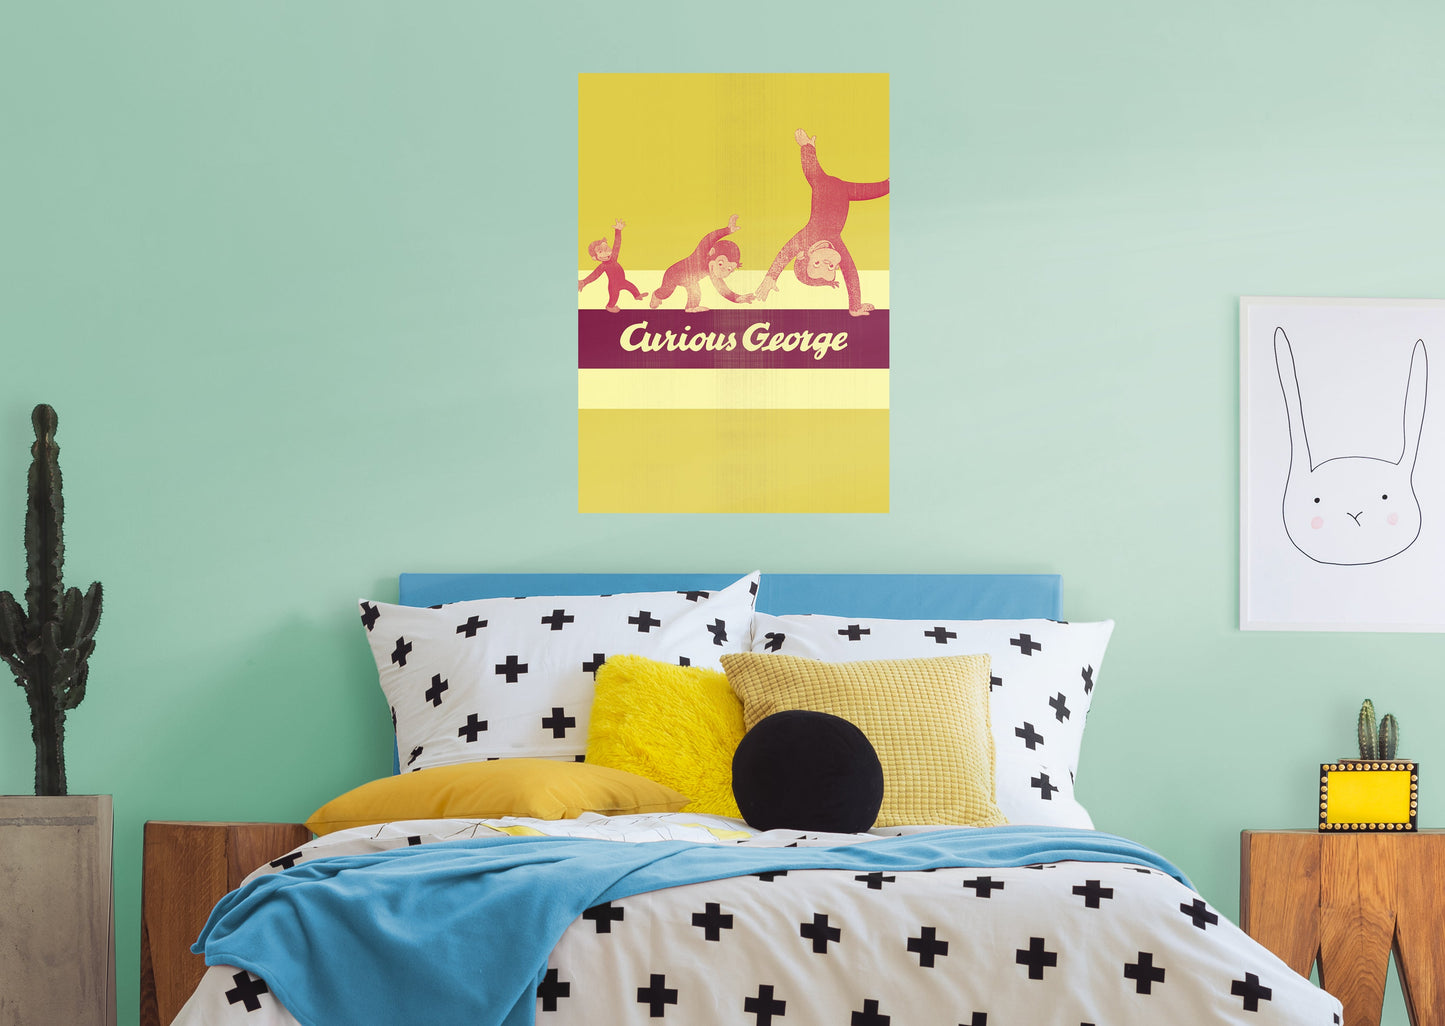 Curious George:  Curious Cartwheel Mural        - Officially Licensed NBC Universal Removable Wall   Adhesive Decal